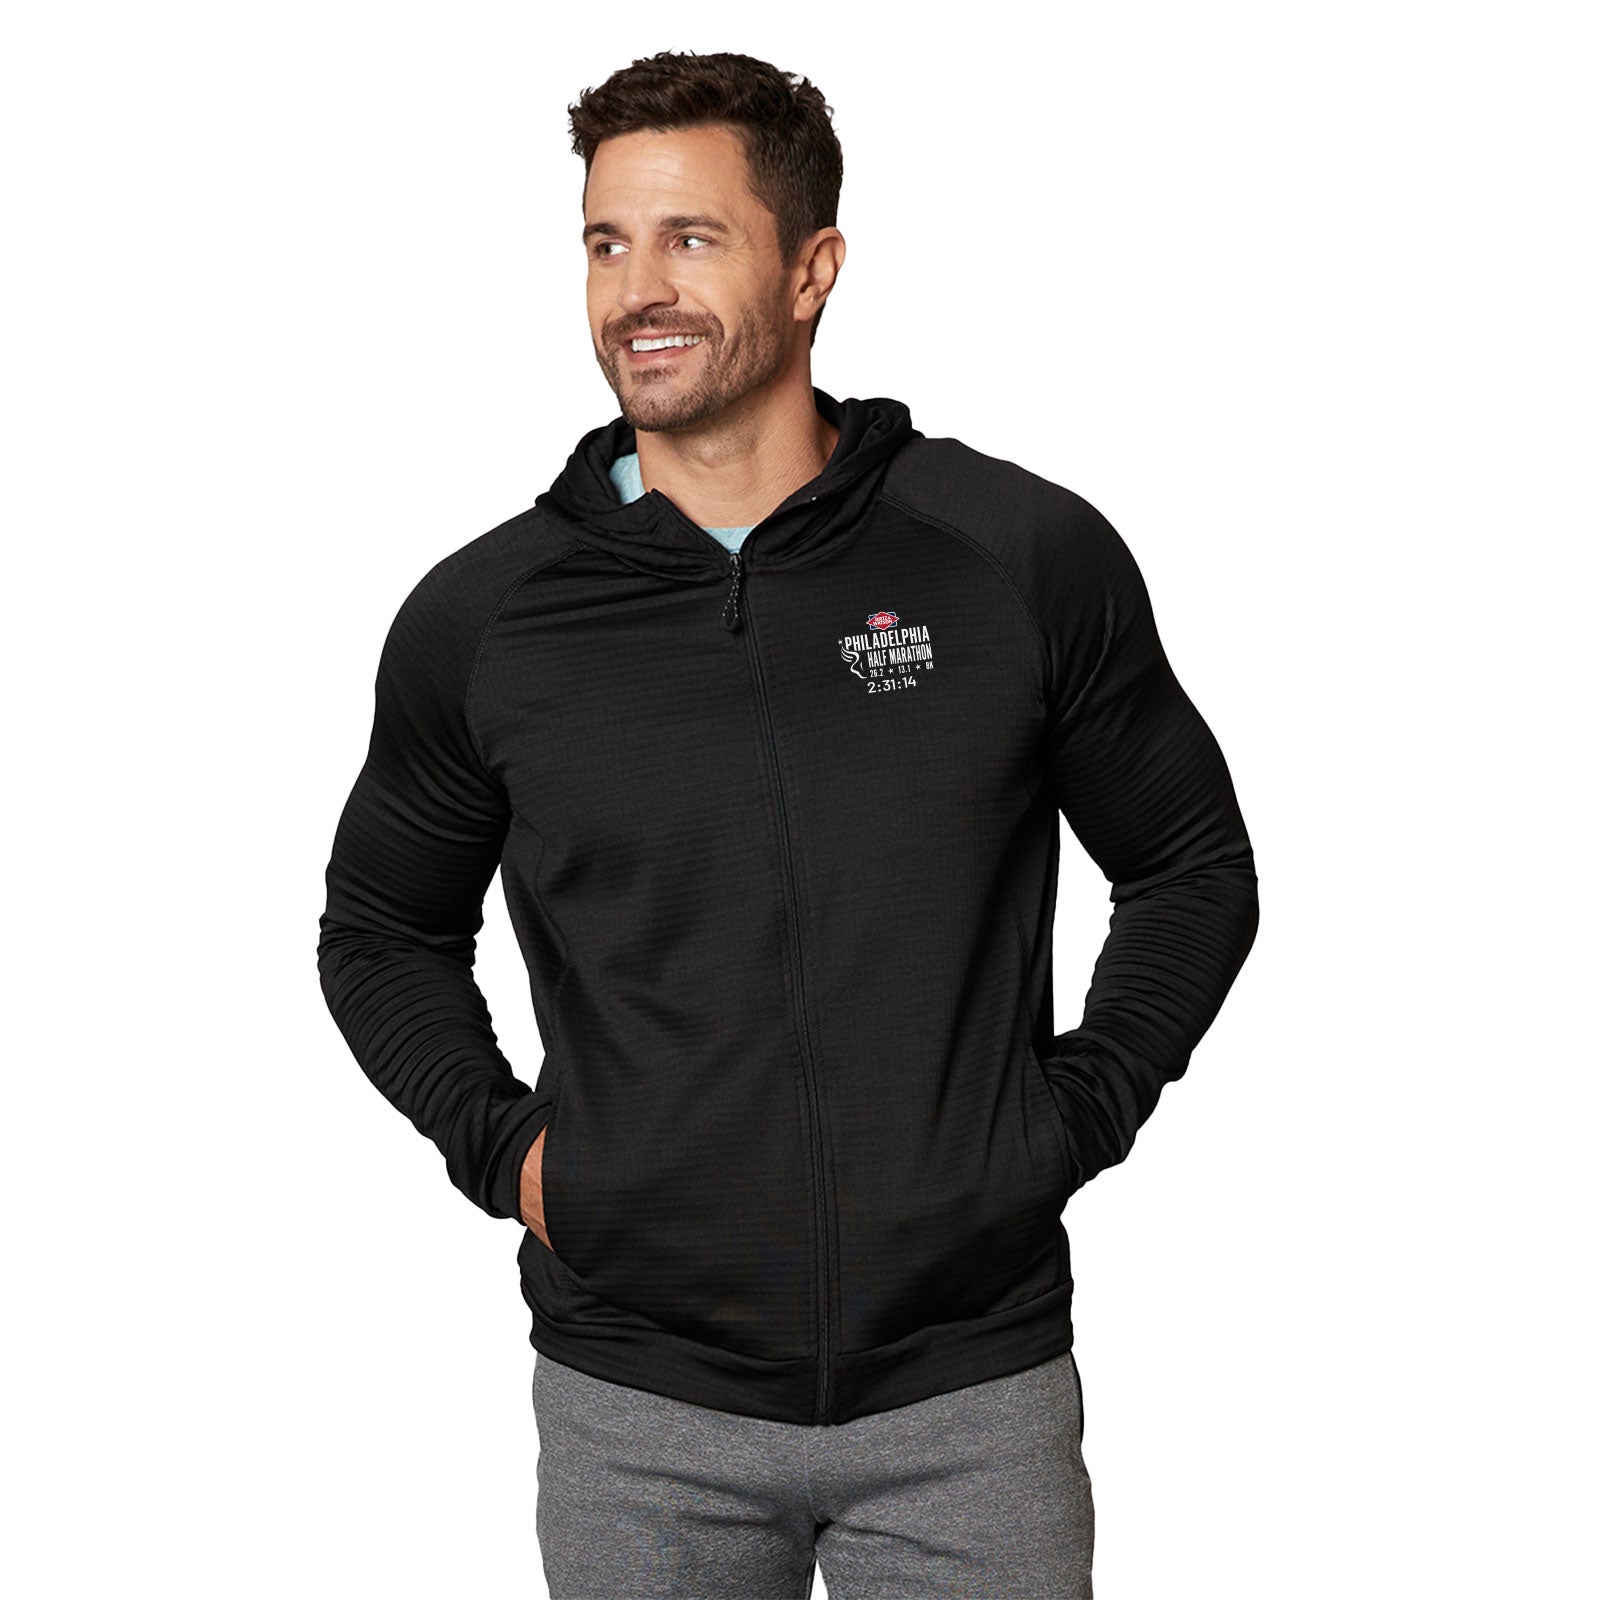 Customized Adult Waffle Zip Hoody -Black- 2023 D&W Finisher LCE